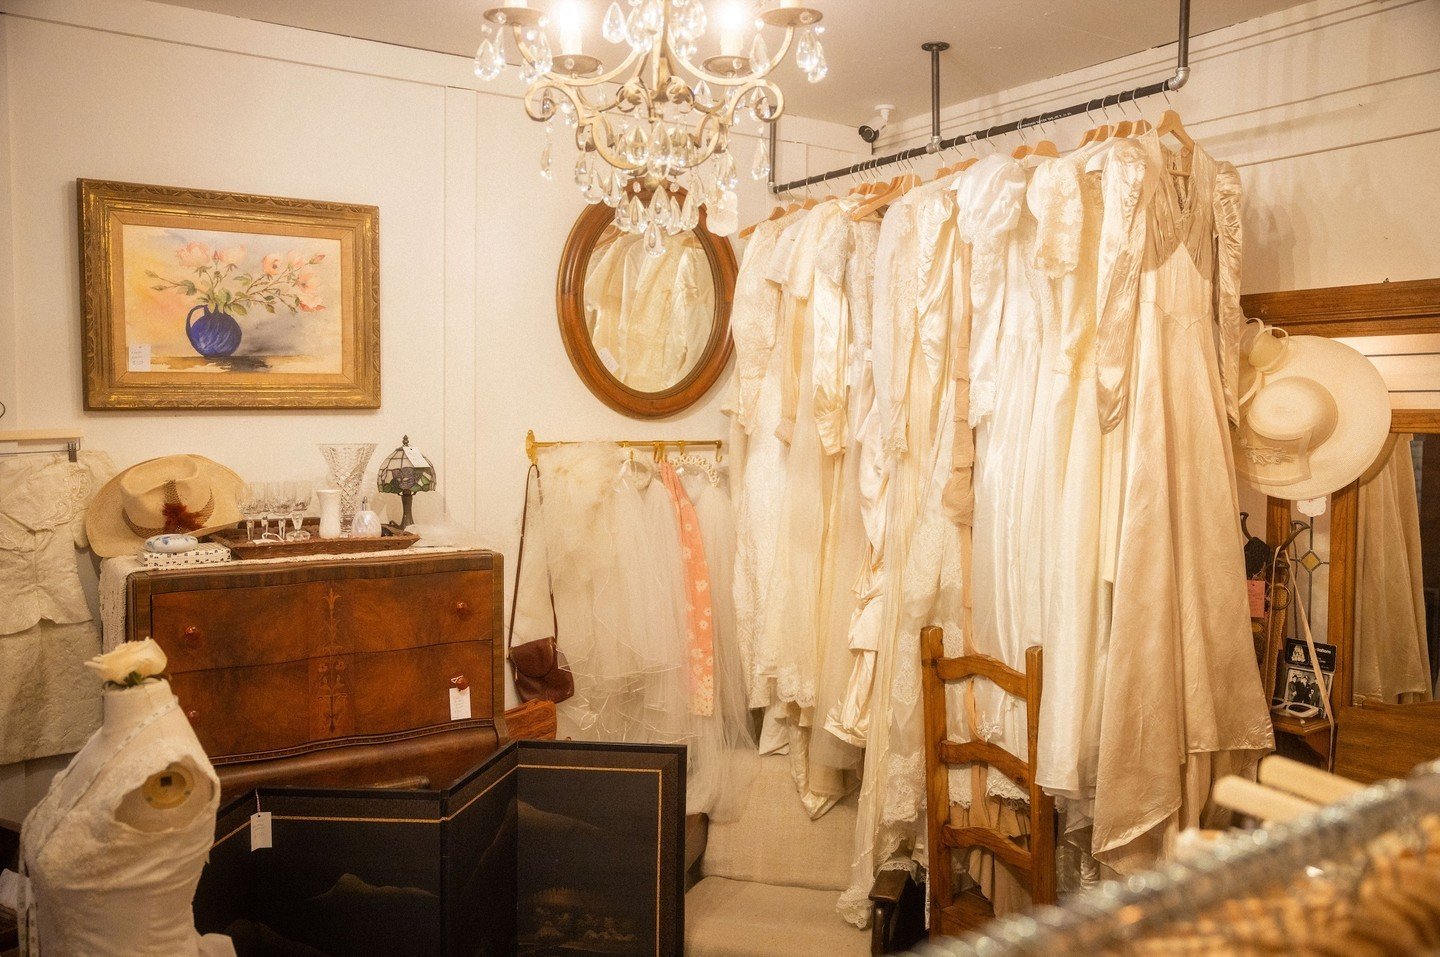 @cream.and.ivory&rsquo;s gorgeous selection of #vintage wedding dresses is all a bride could ask for! 👰&zwj;♀️ Have an eco-friendly wedding by wearing vintage when you say &ldquo;I do&rdquo;. ✨

#VintageWeddingDress #ShopAntiques